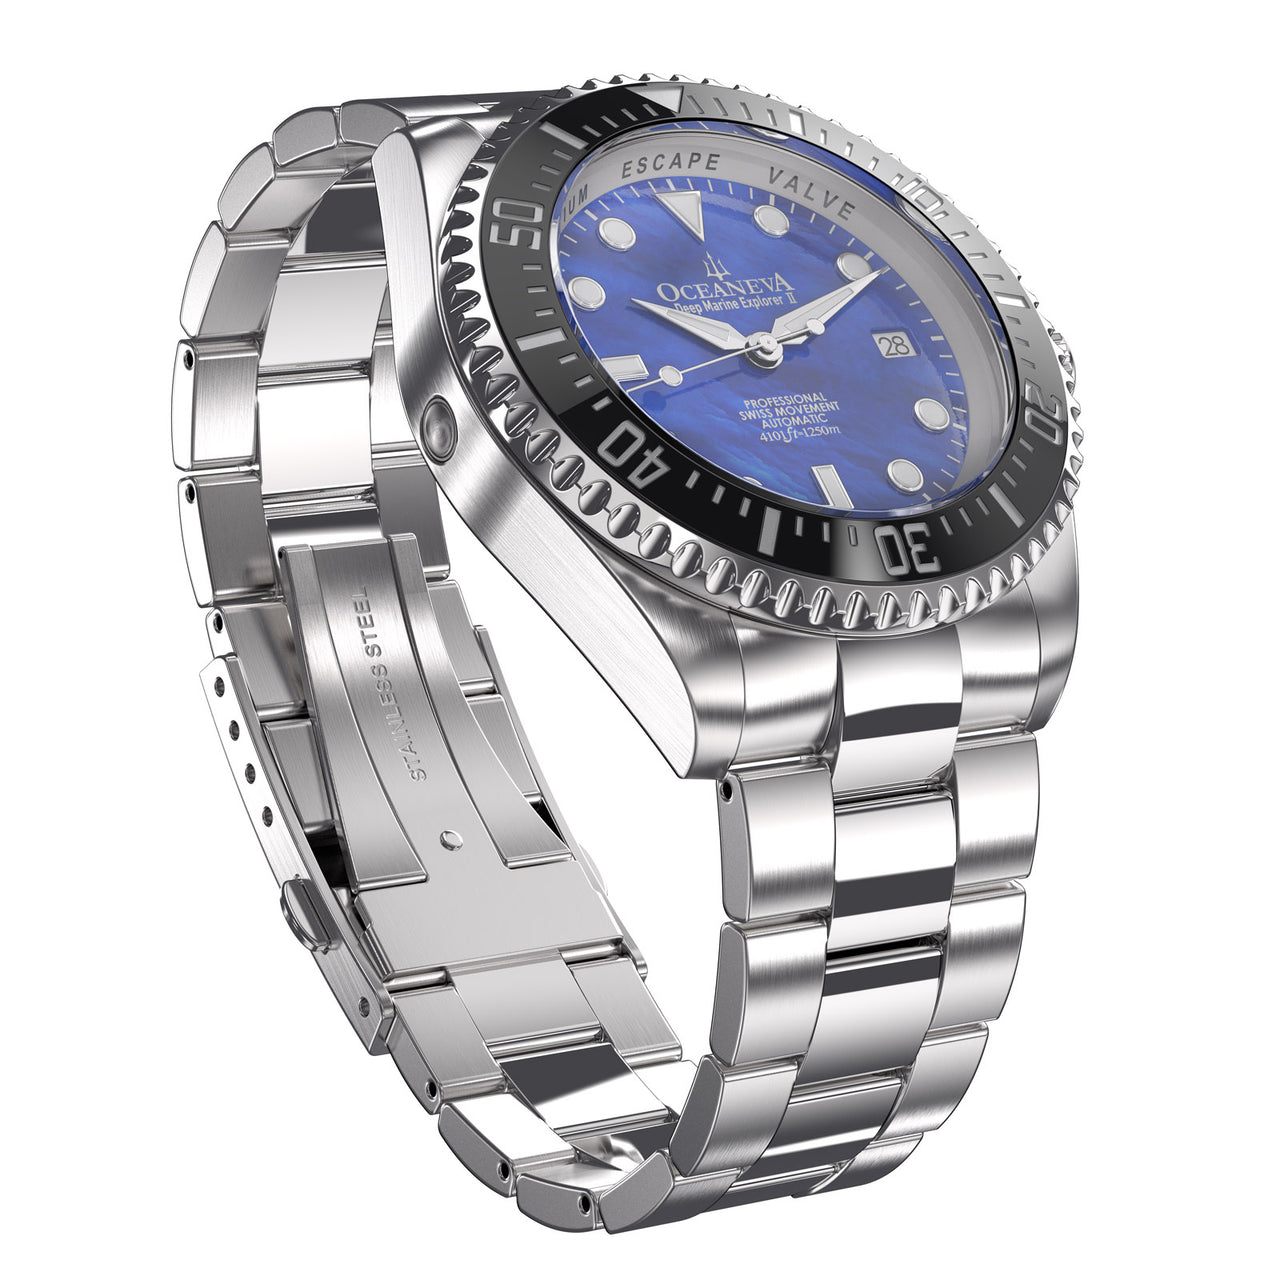 Oceaneva 1250M Dive Watch Blue Mother of Pearl Front Picture Slight Right Slant View